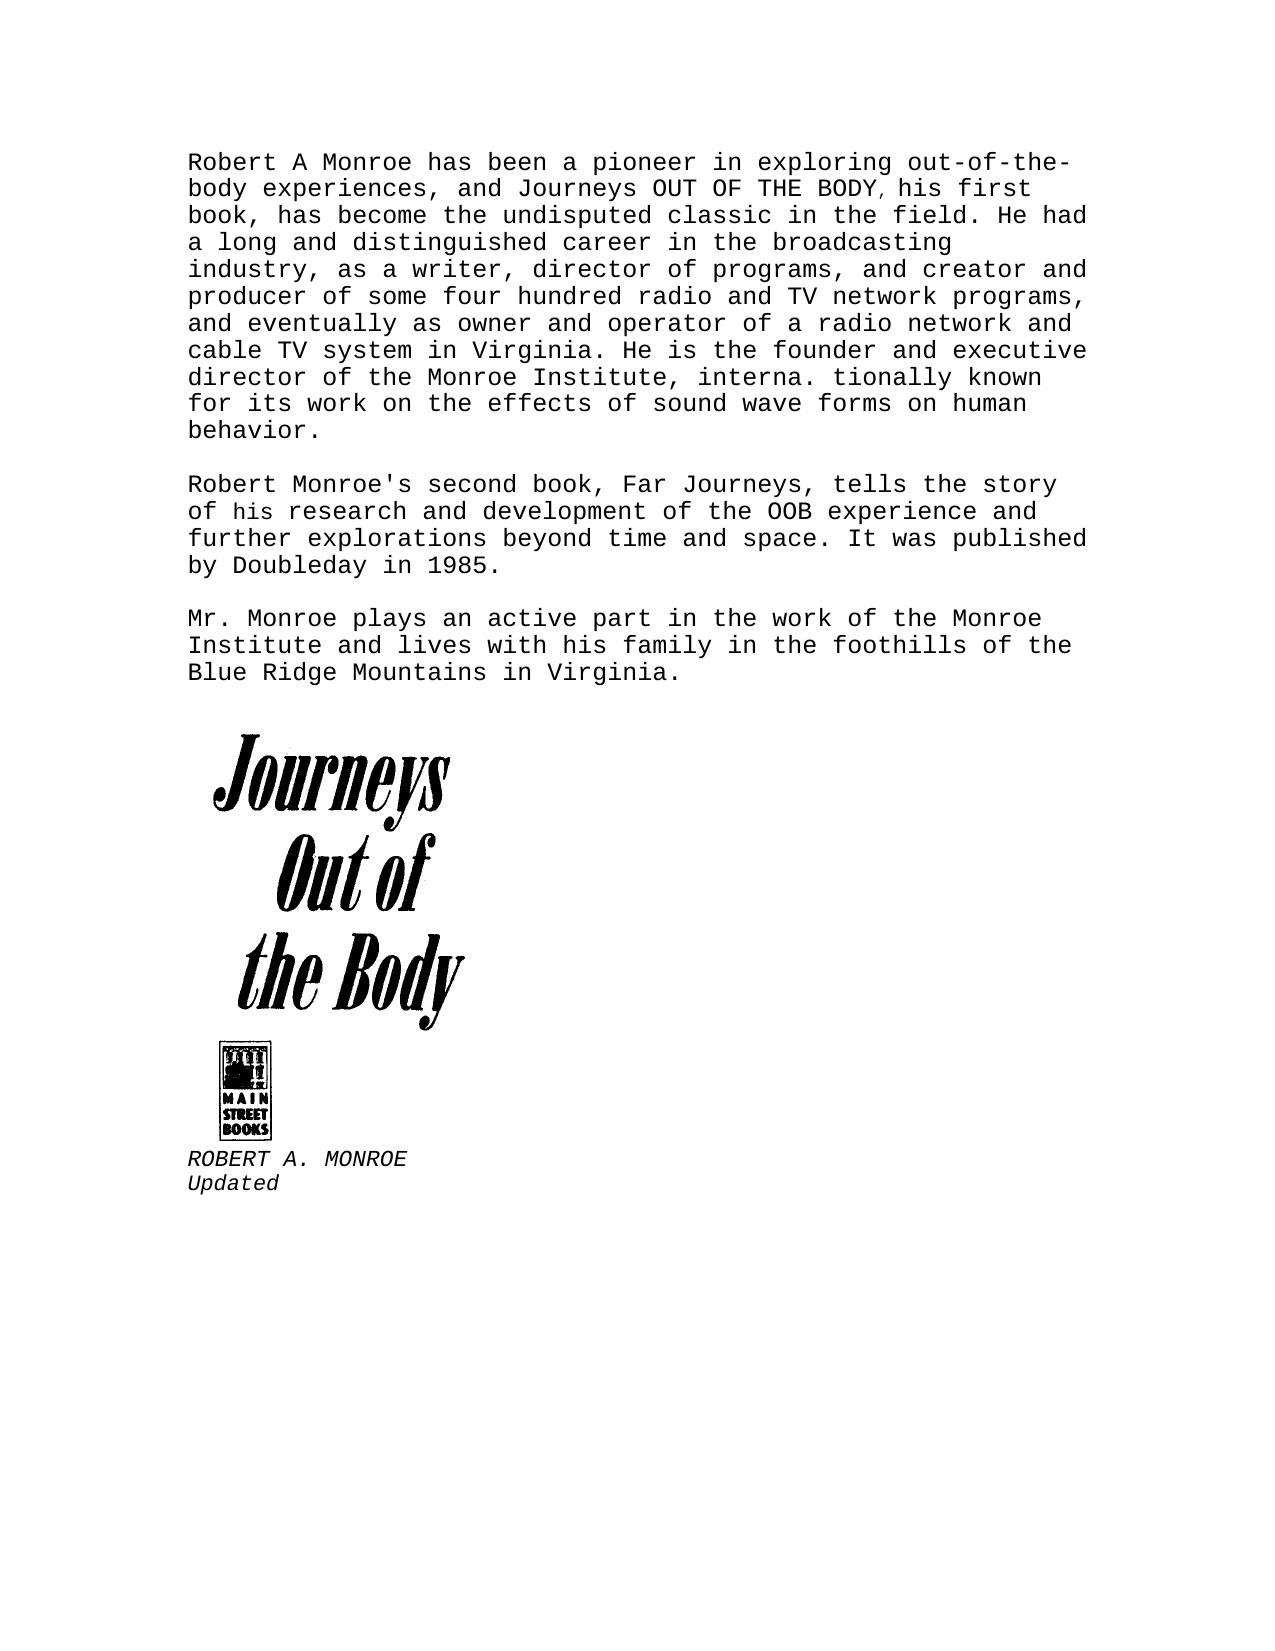 Journeys Out of the Body by Robert Monroe